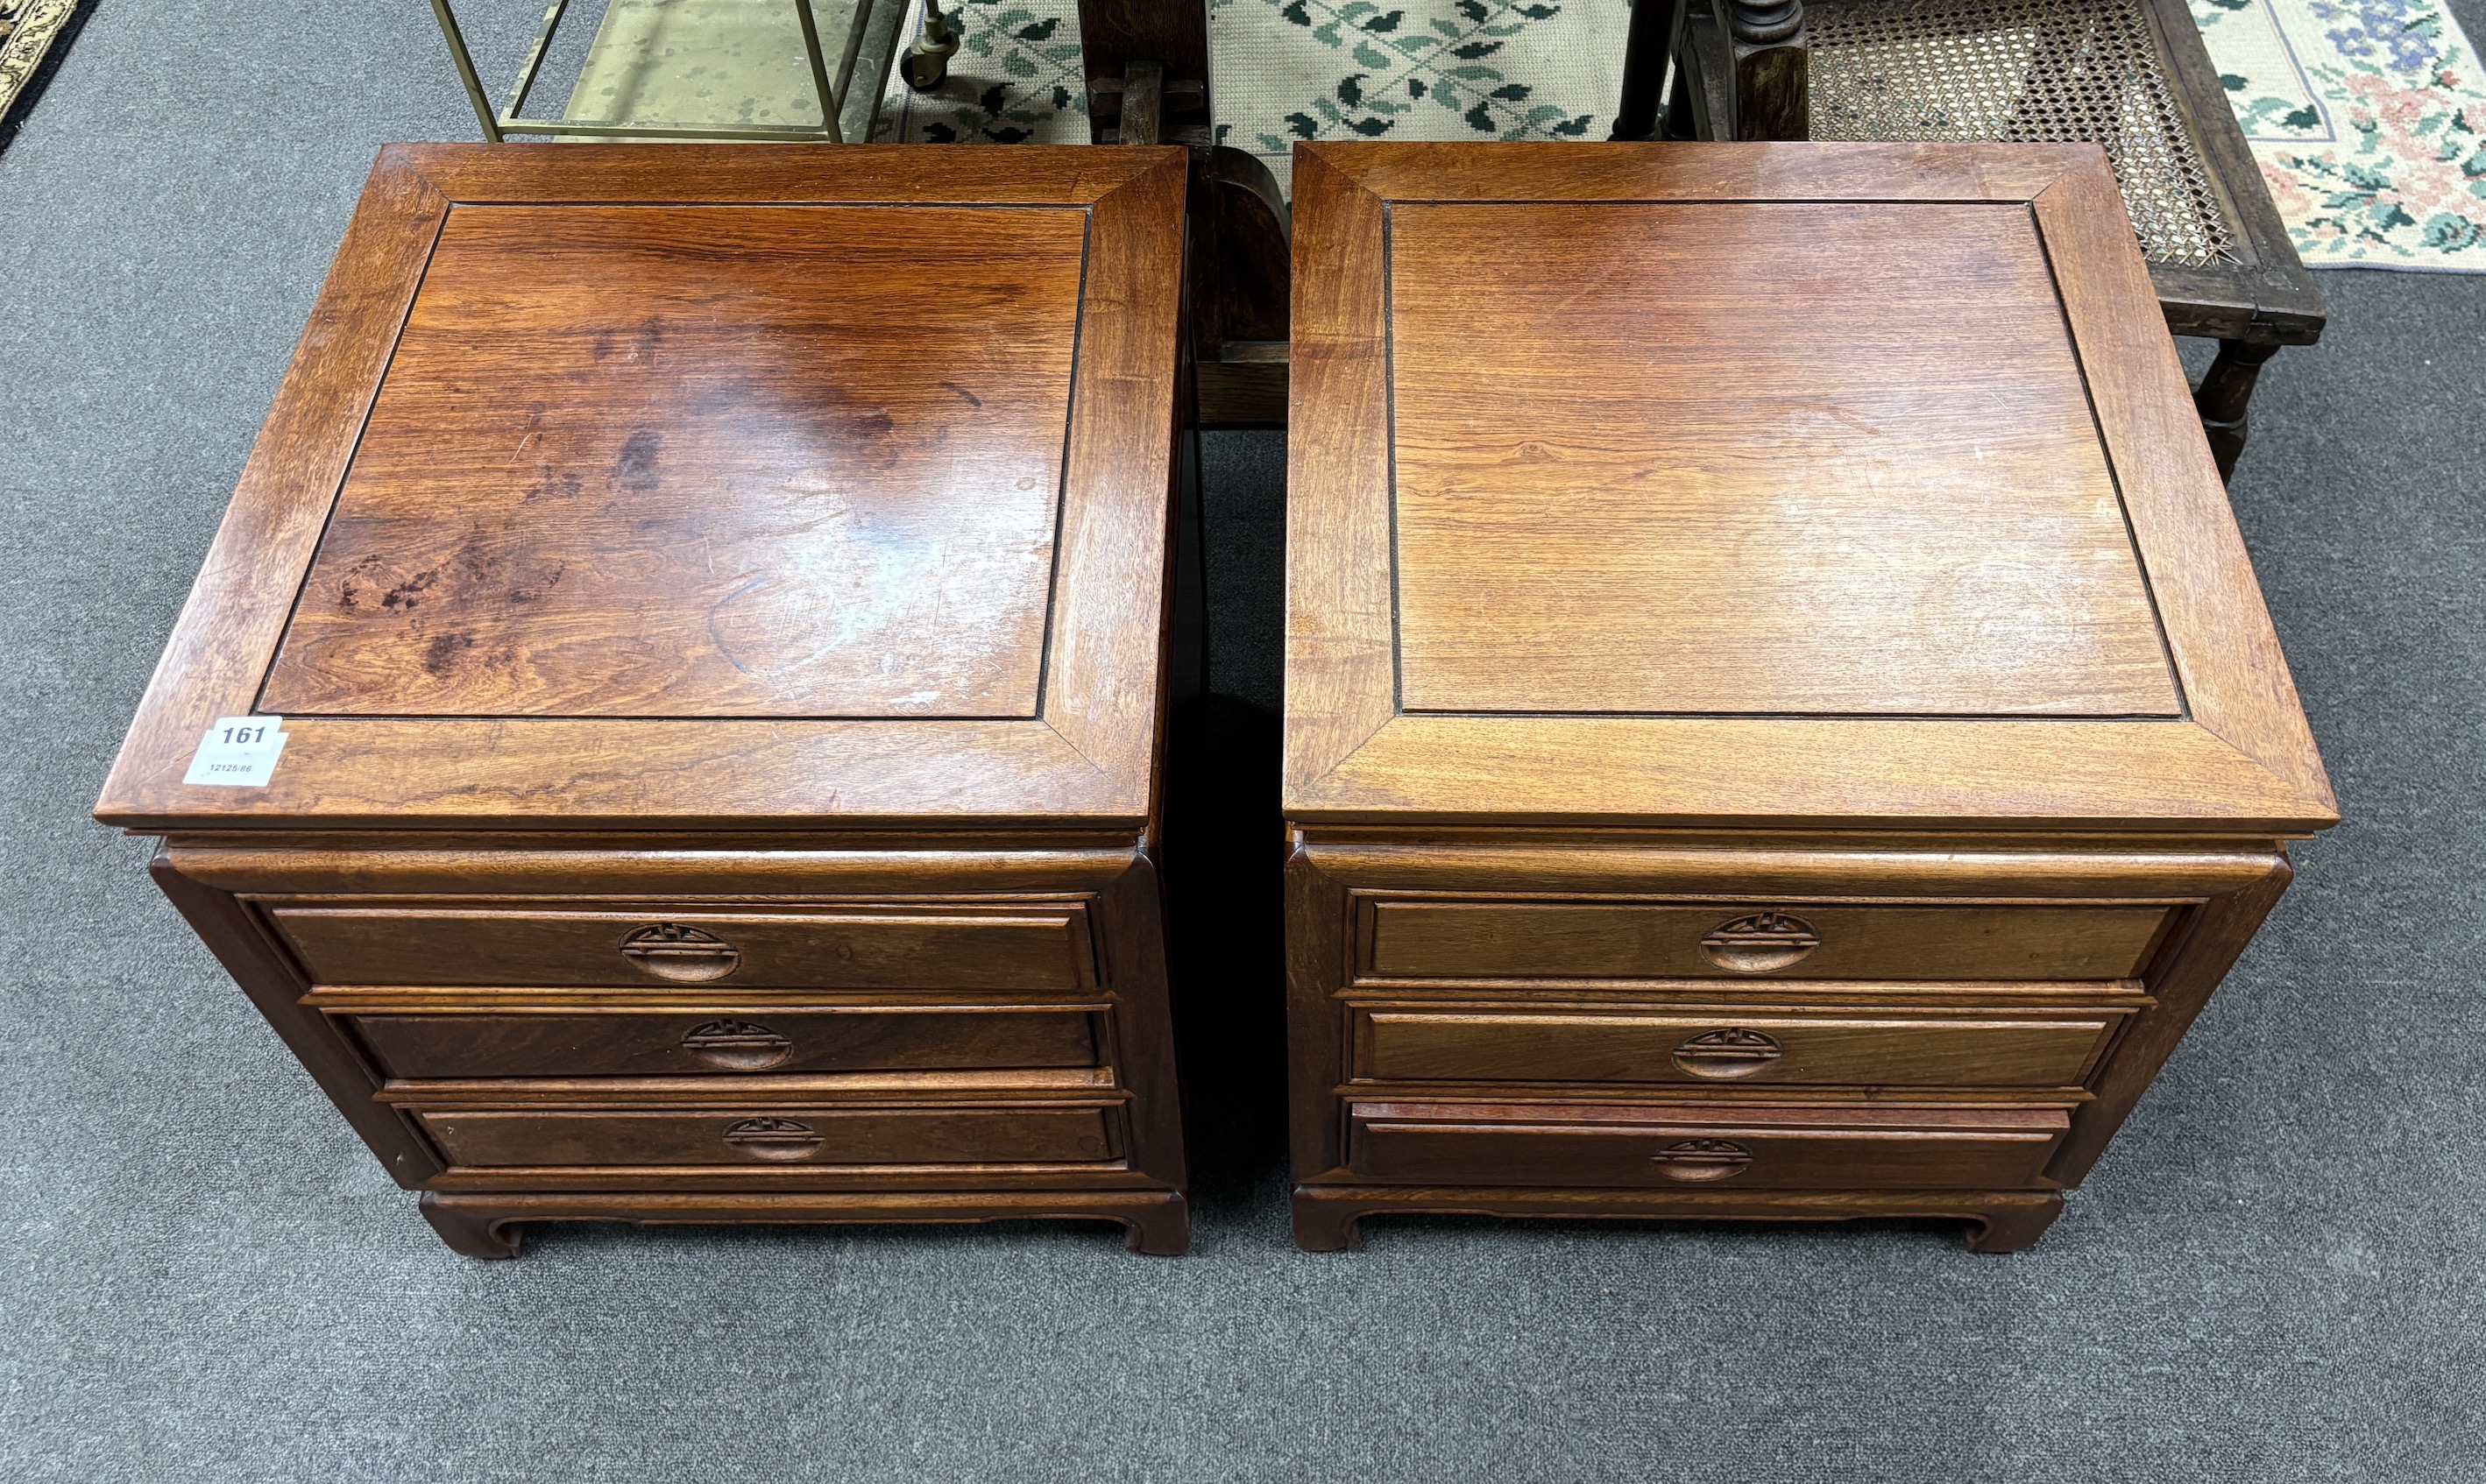 A pair of Chinese hardwood three drawer bedside chests, width 50cm, depth 50cm, height 56cm